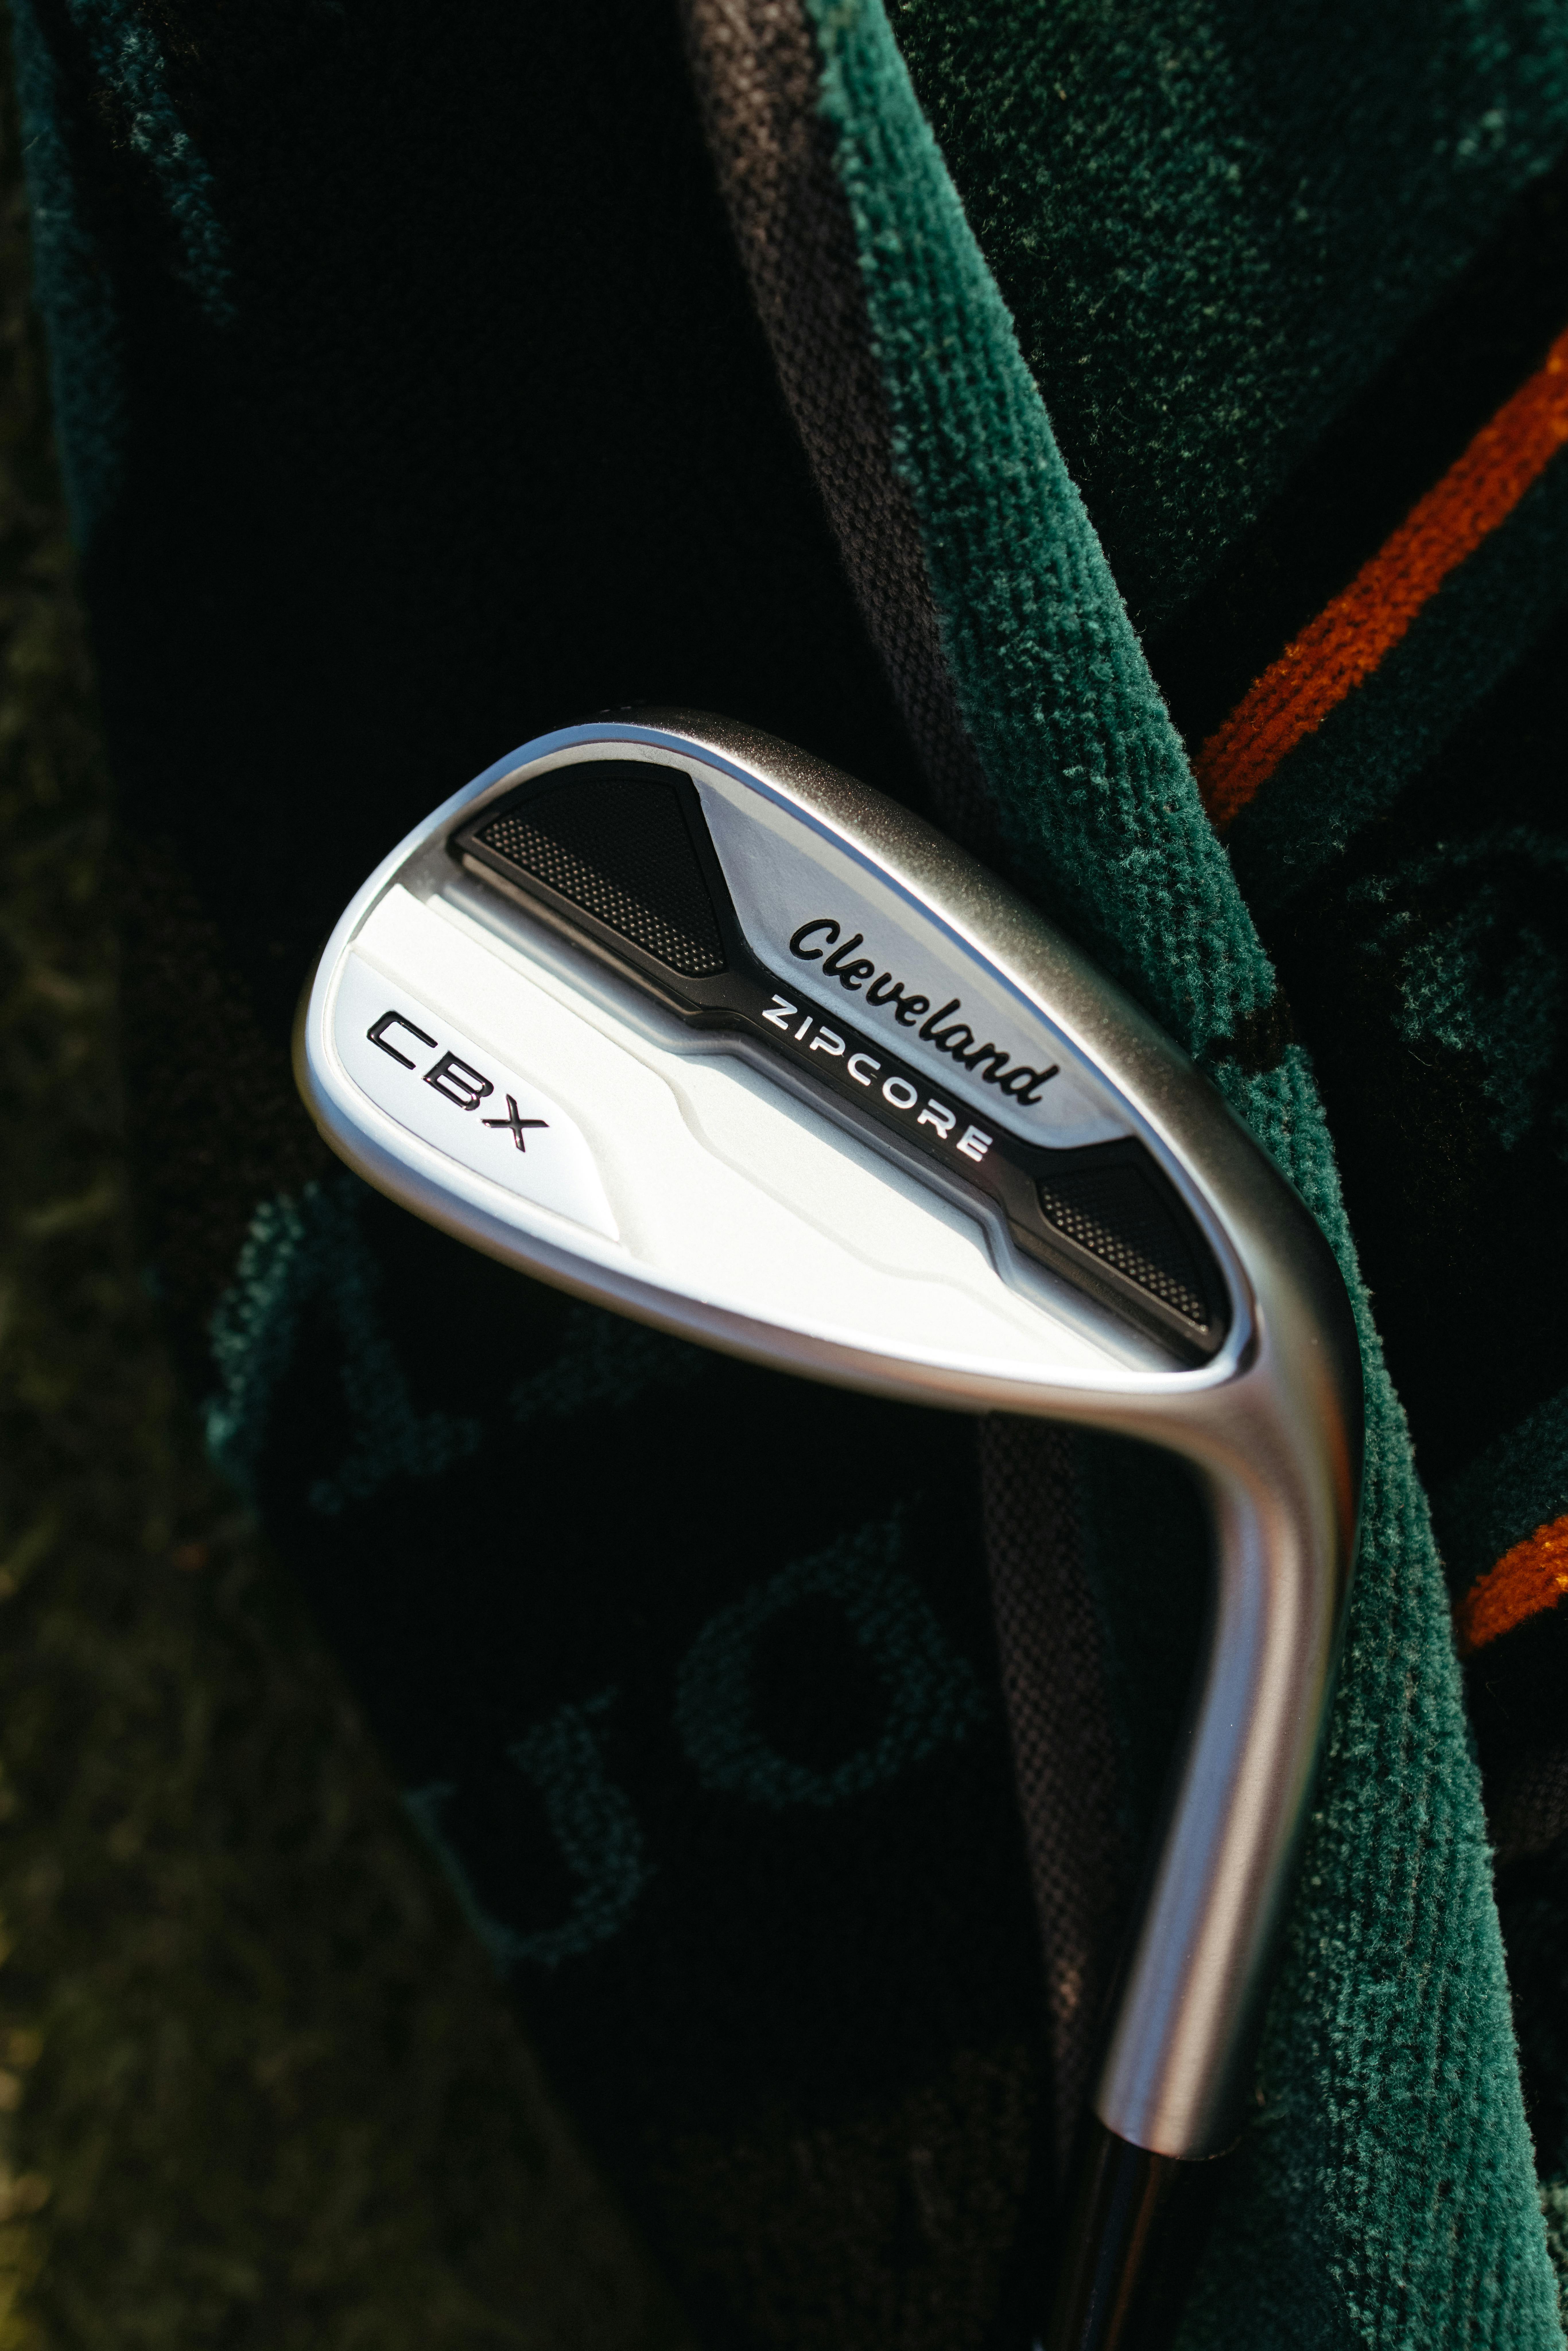 Cleveland CBX Zipcore Wedge · Right handed · Steel · 52° · 11° · Chrome